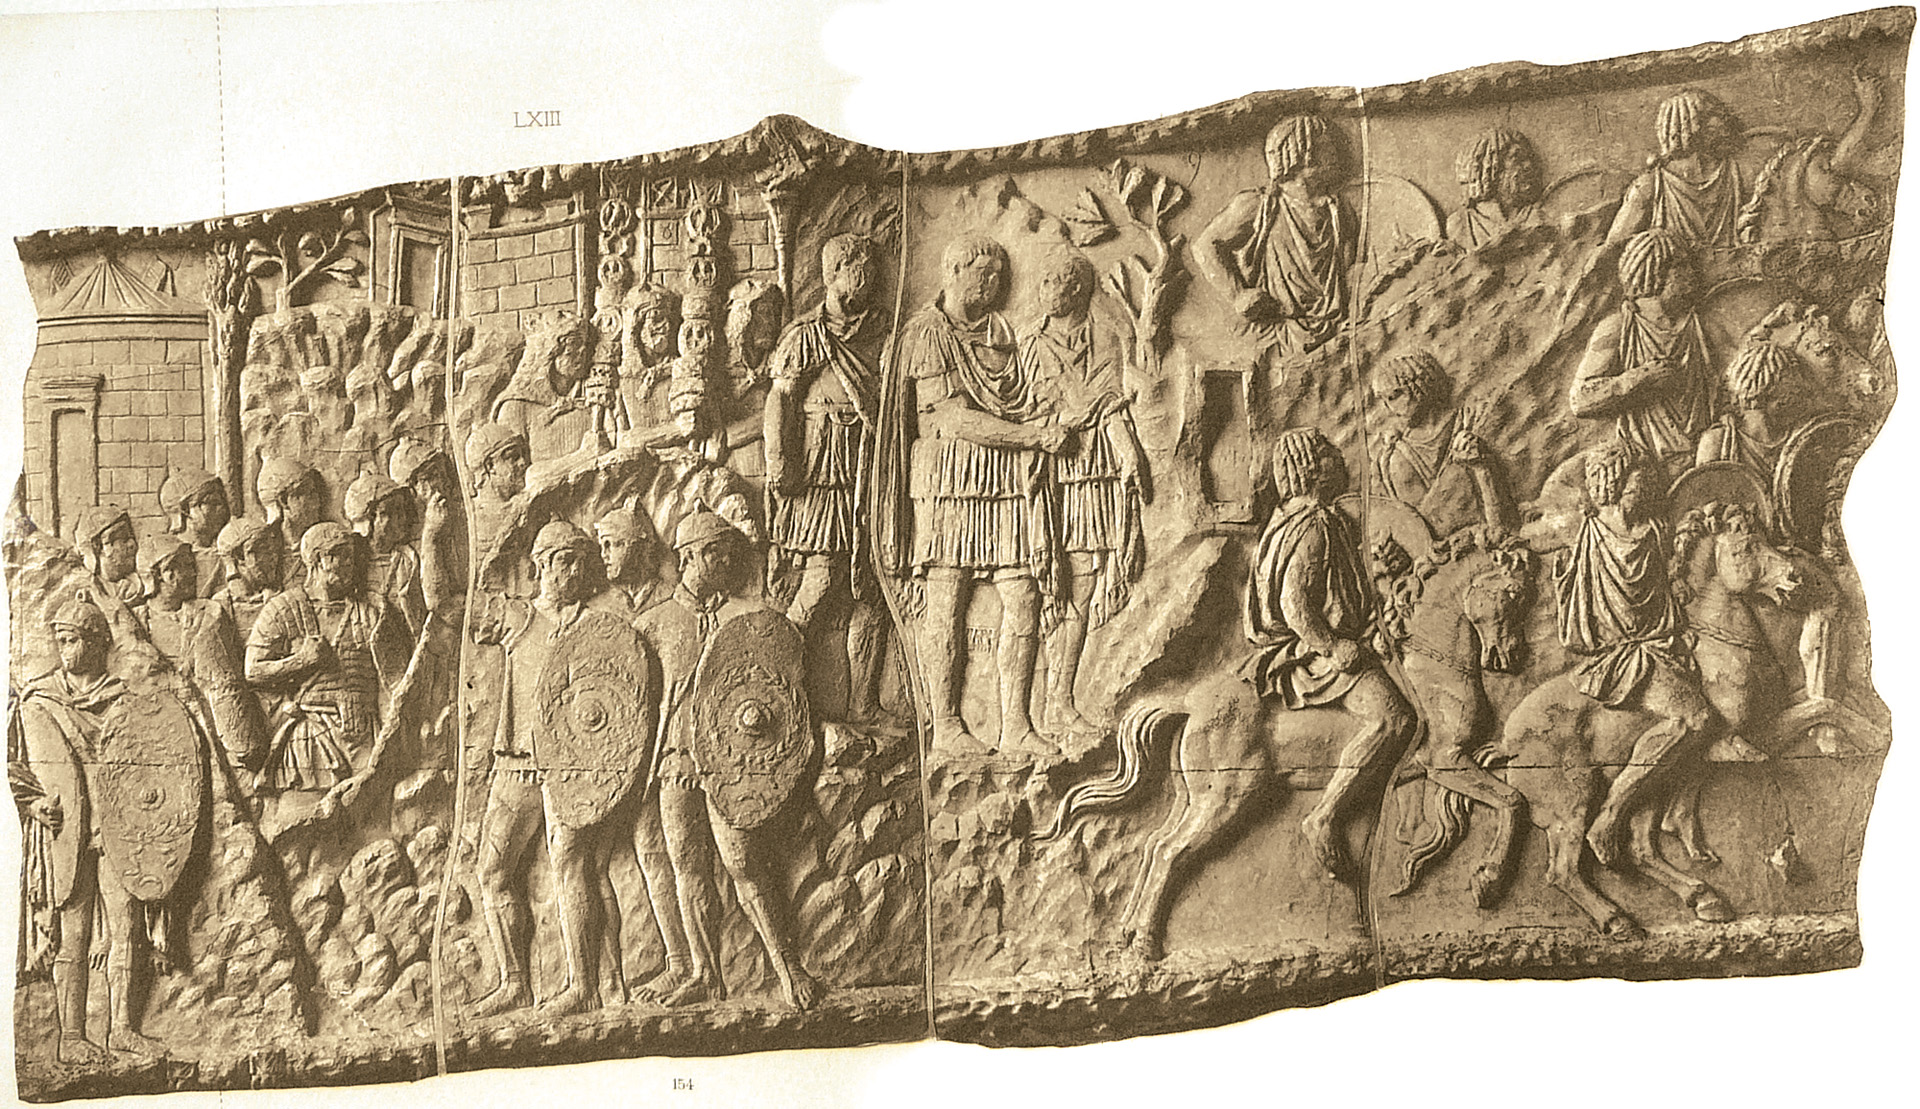 Numidian cavalrymen are depicted on a relief copy of Trajan’s column. Infuriated by Tacfarinas’ audacity, Roman Emperor Tiberius deployed more troops to northwest Africa. In the end, Tacfarinas’ rebel army was no match for the vast resources of Rome.